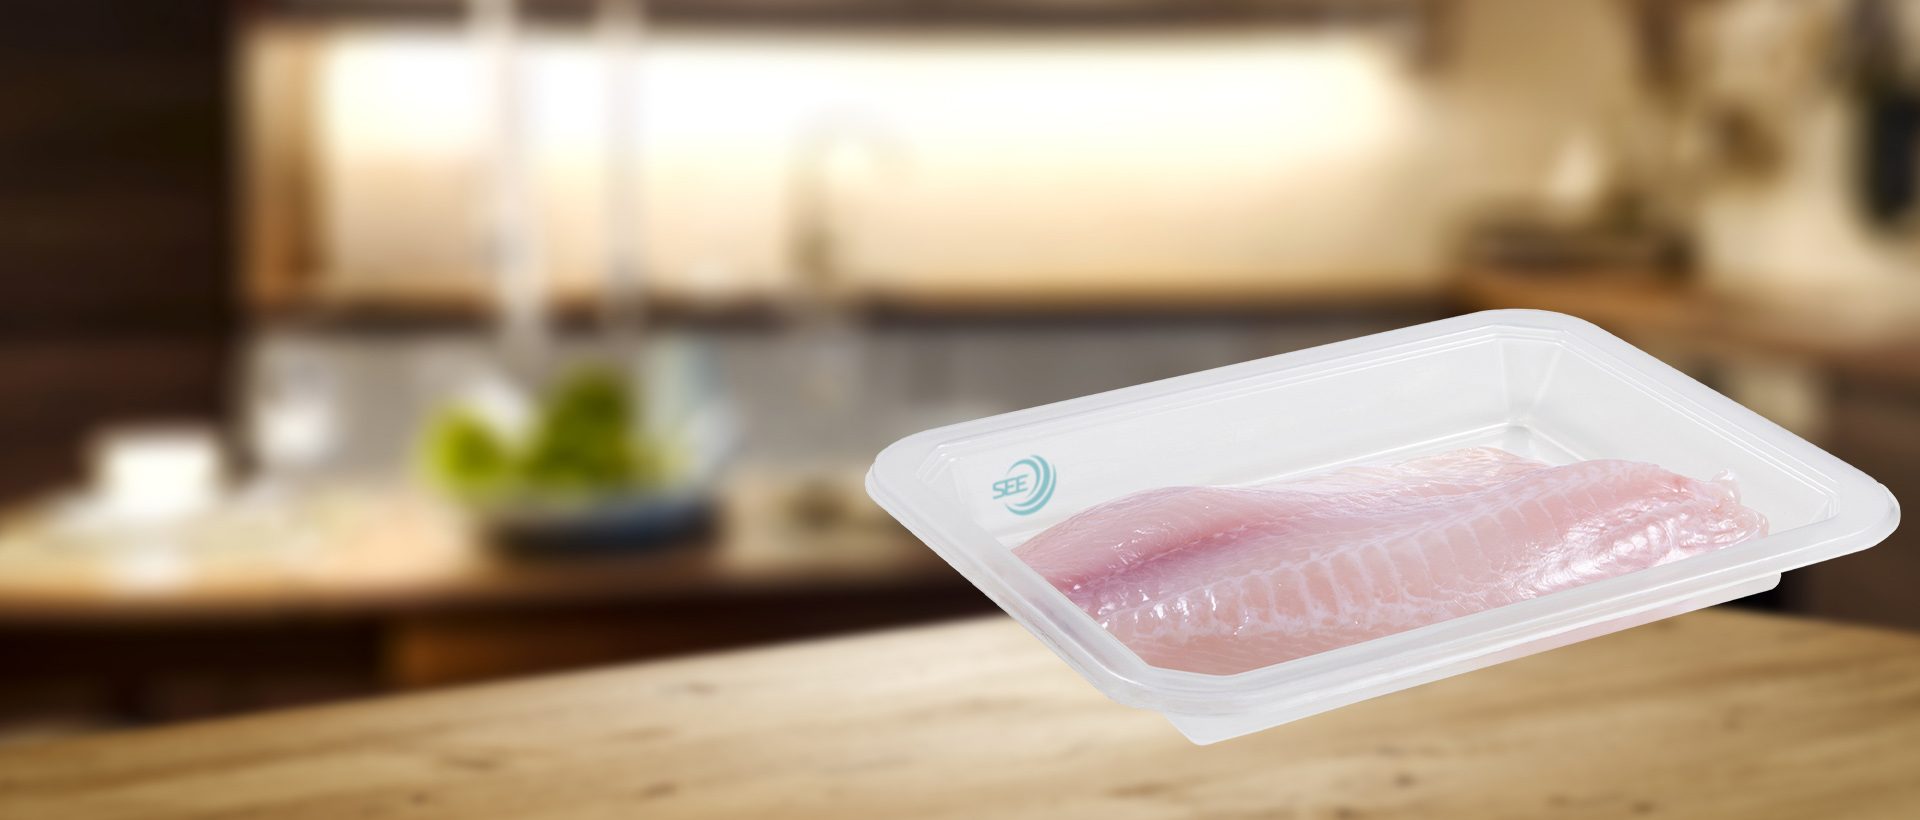 CRYOVAC preformed vacuum skin packaging tray with fresh seafood tiliapia fish